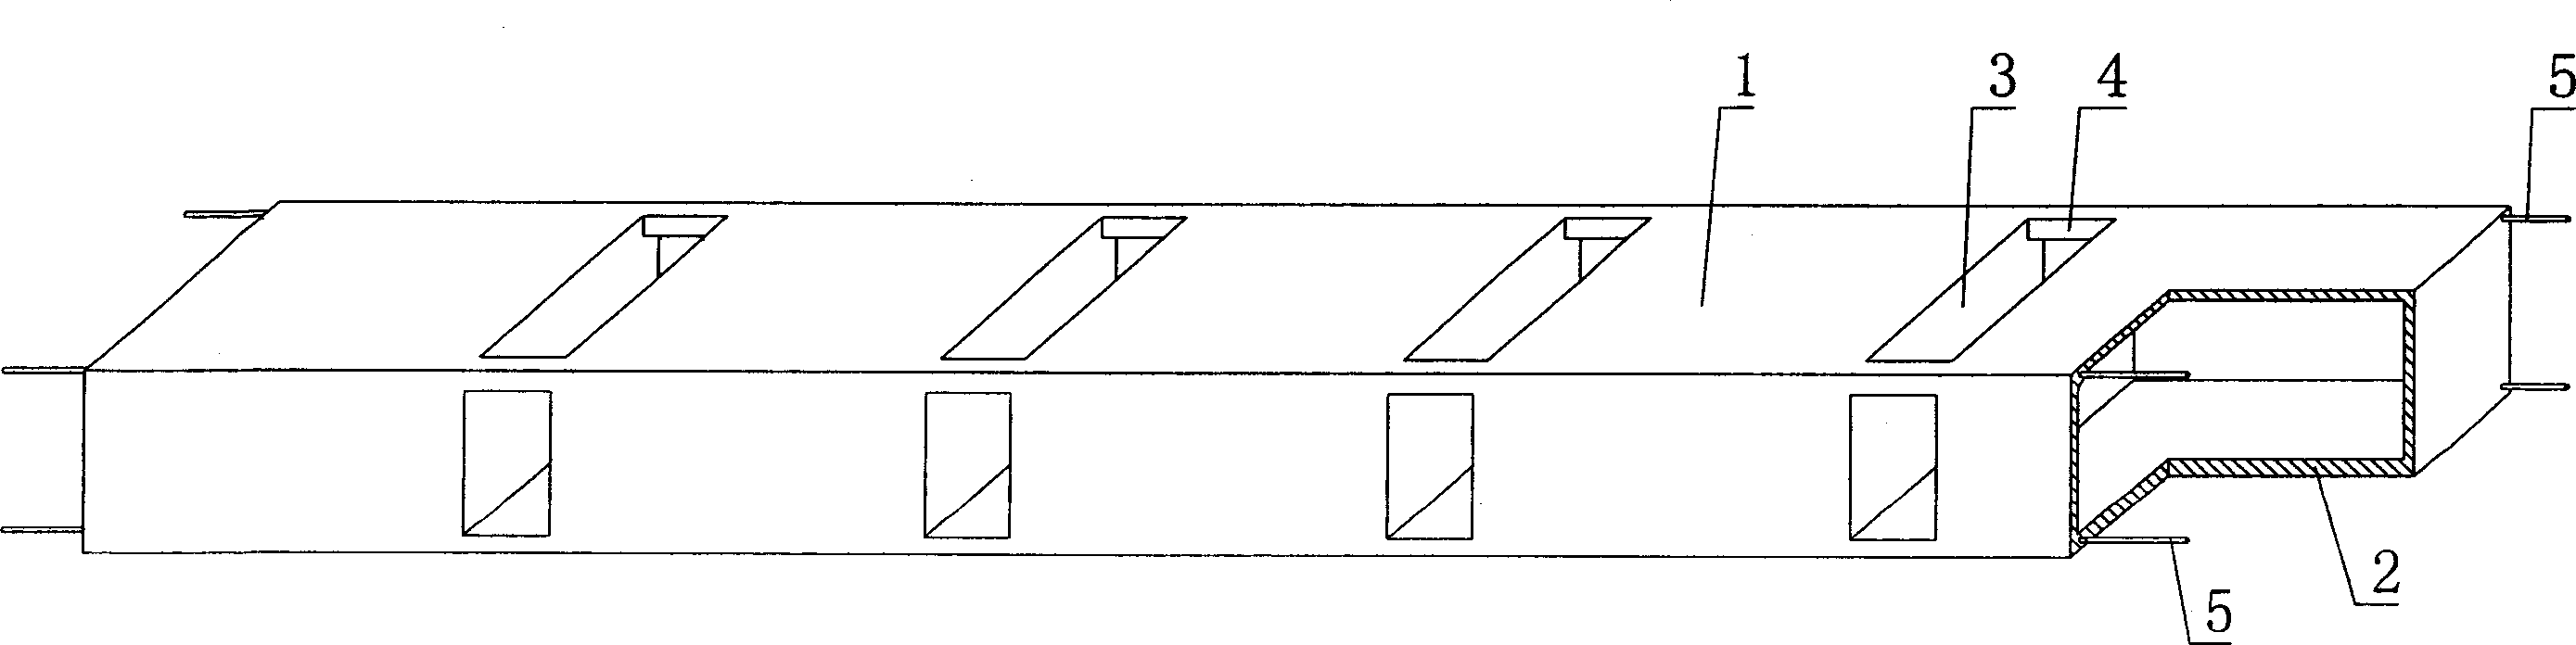 Hollow cavity structural component for hollow board